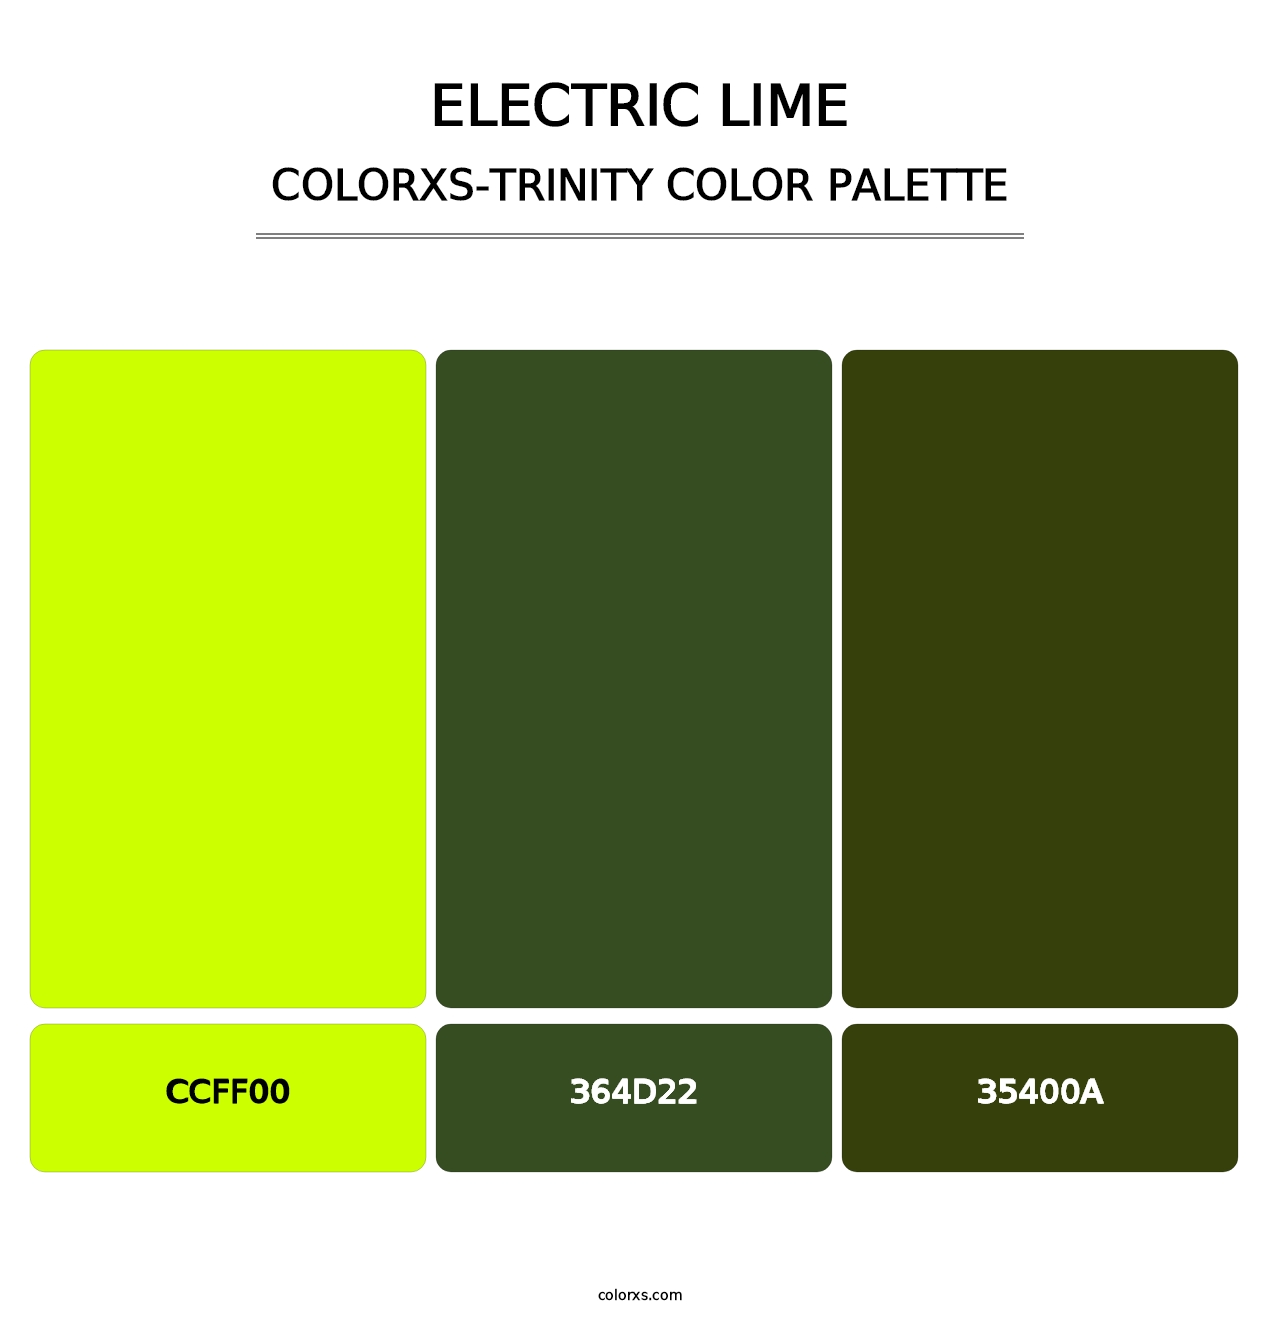 Electric Lime - Colorxs Trinity Palette